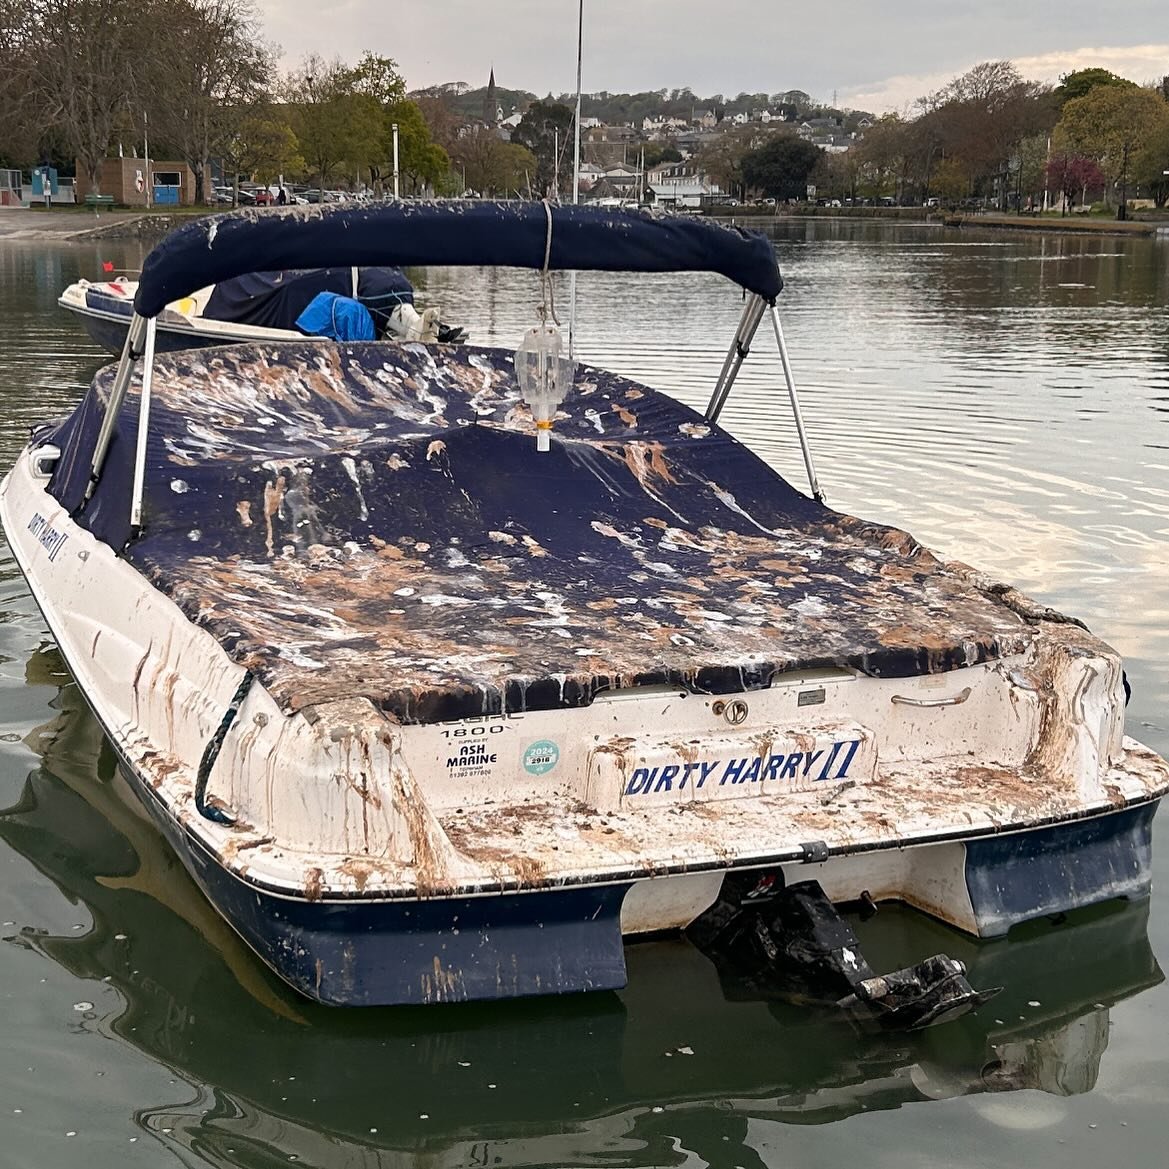 Not sure if the owner chose the name after the seagulls nominated his boat the village public poop house, but having been there myself it&rsquo;s very depressing to see this when paddling out to your mooring! Quite why these flying rats are so protec